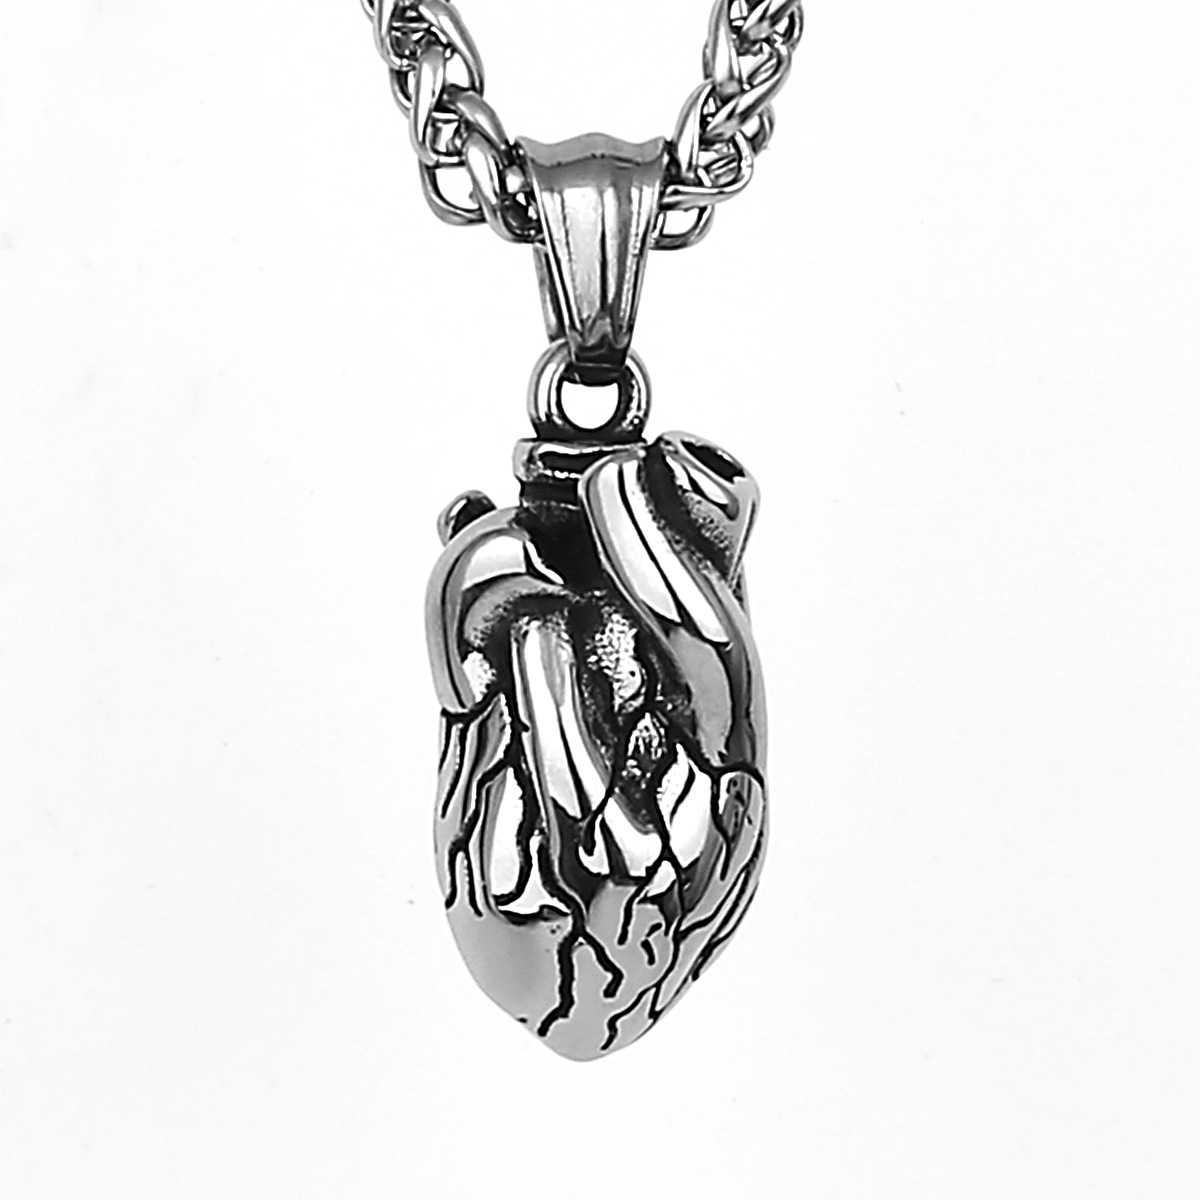 Pendant with 60cm keel chain